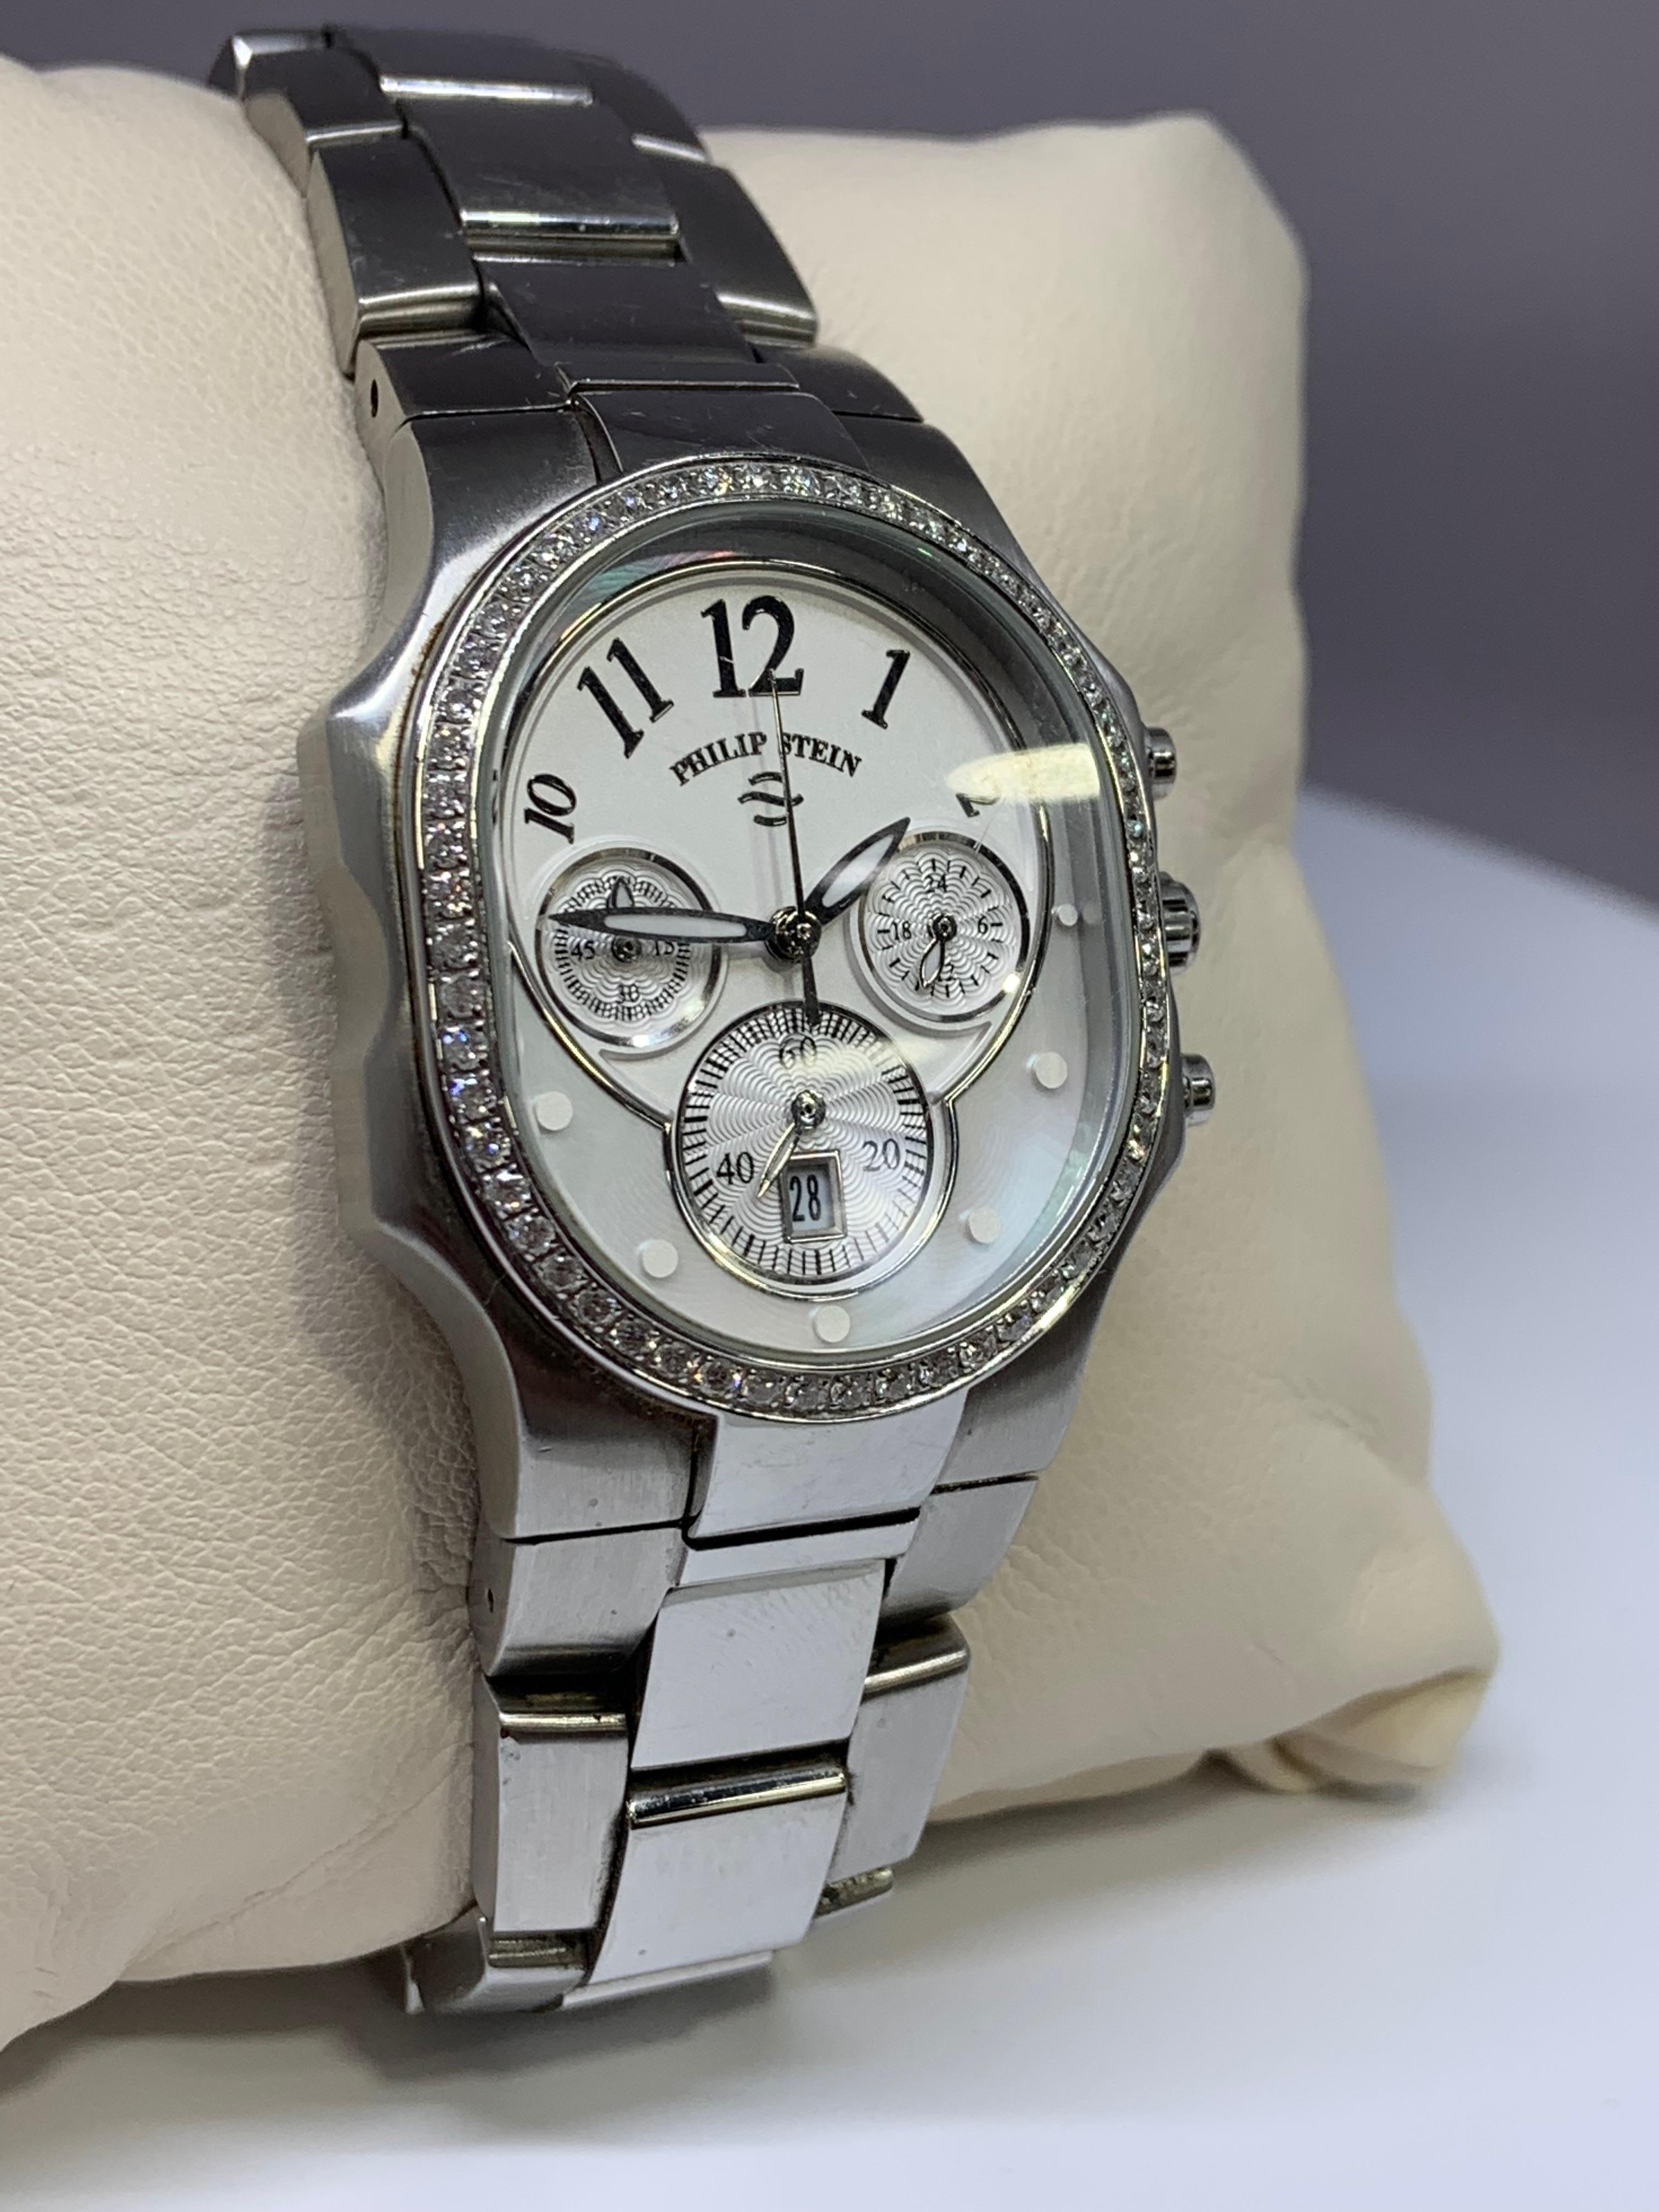 Gently used Philip Stein watch in excellent condition! This watch features a gorgeous mother of pearl detail on the face, as well as an eye-catching diamond bezel. This watch is made of stainless stell and is 3 ATM water resistant. The serial number